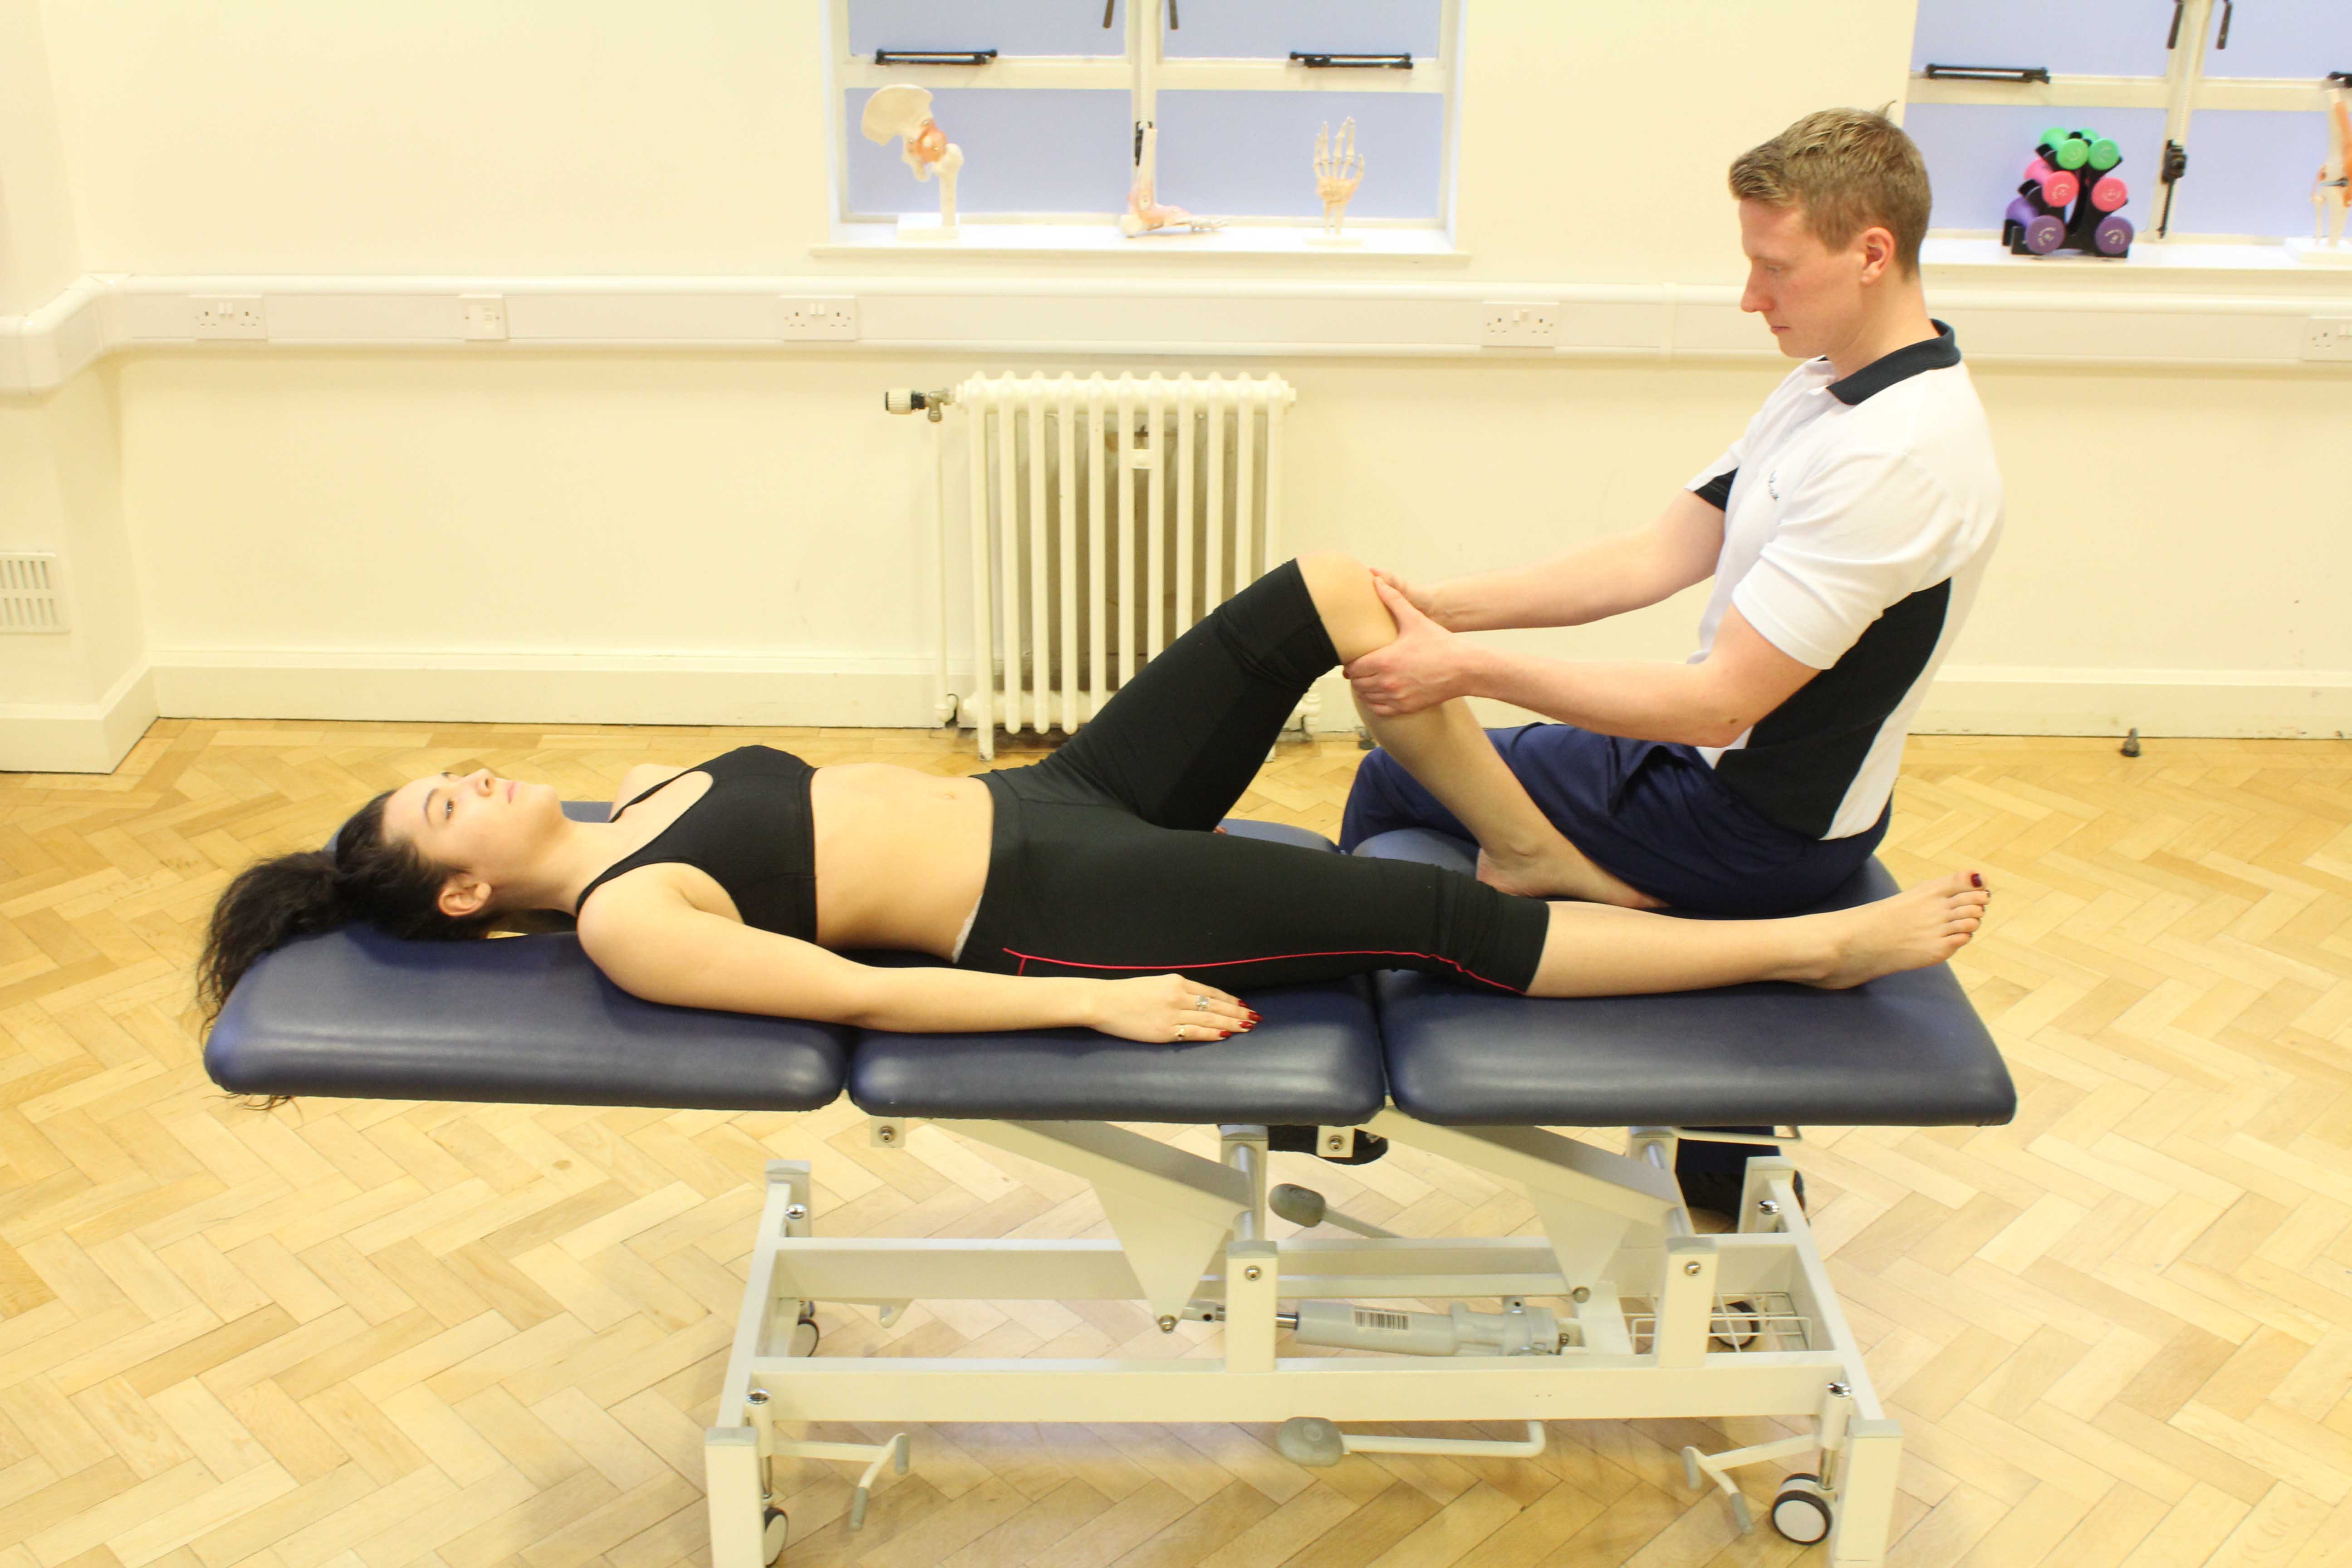 Mobilisations of the knee joint by experienced musculoskeletal physiotherapist